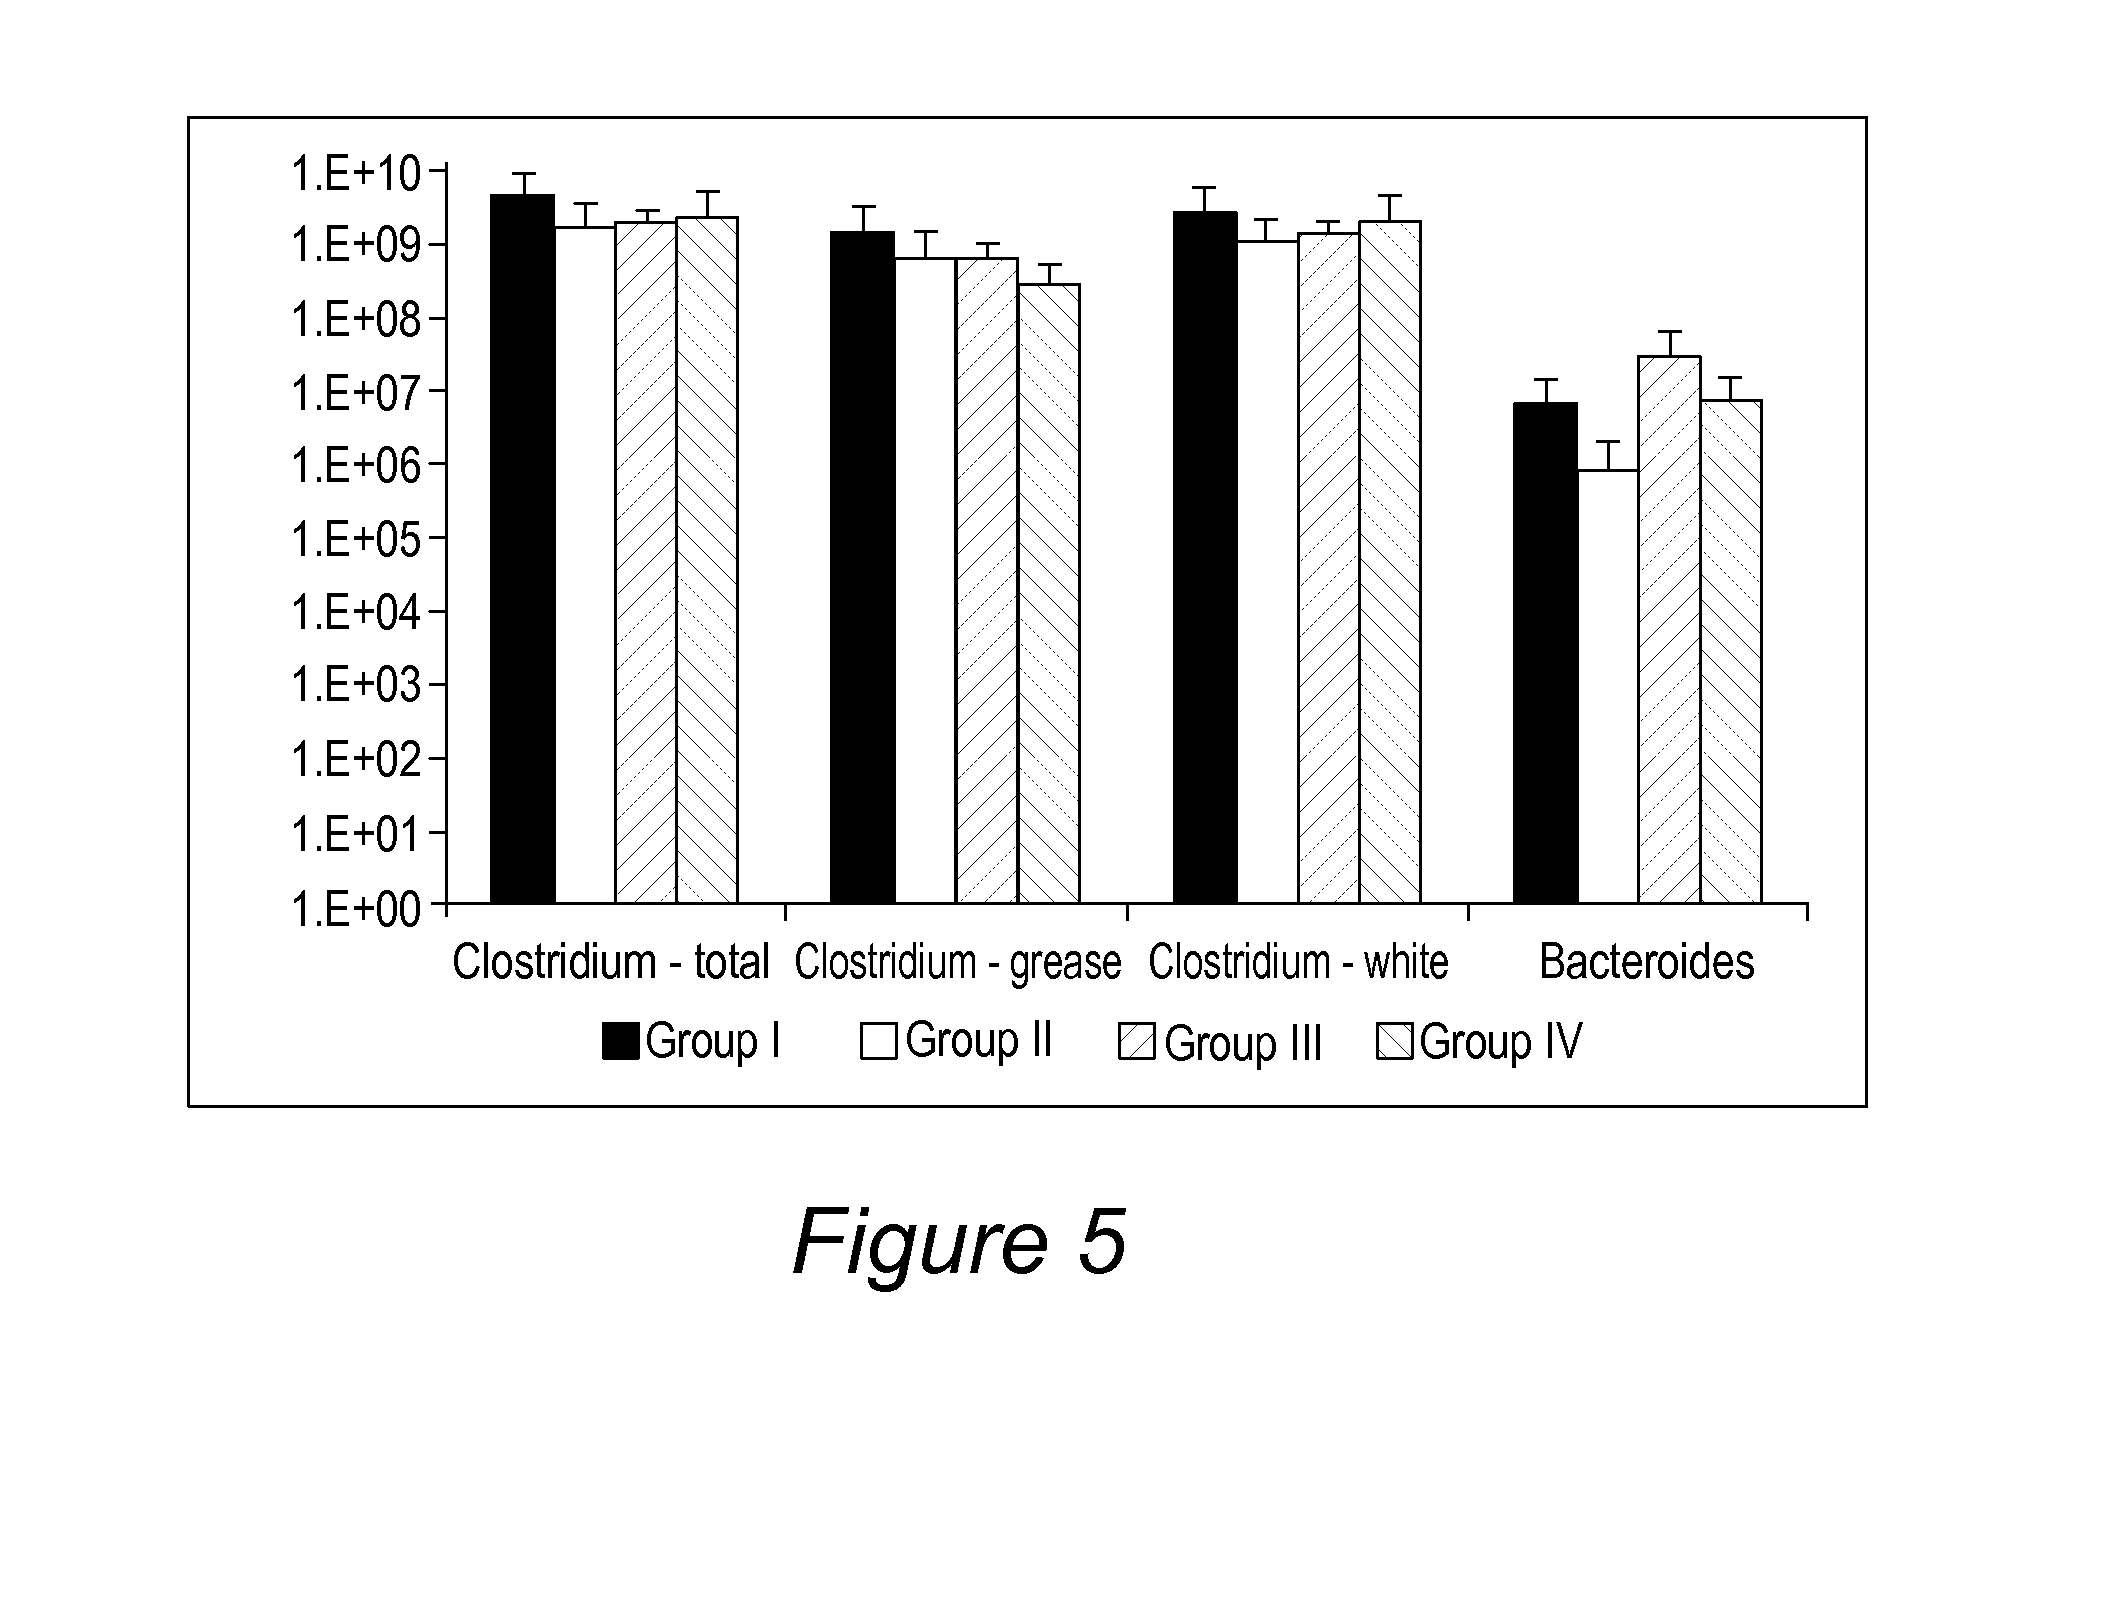 Antiparasitic compositions and methods